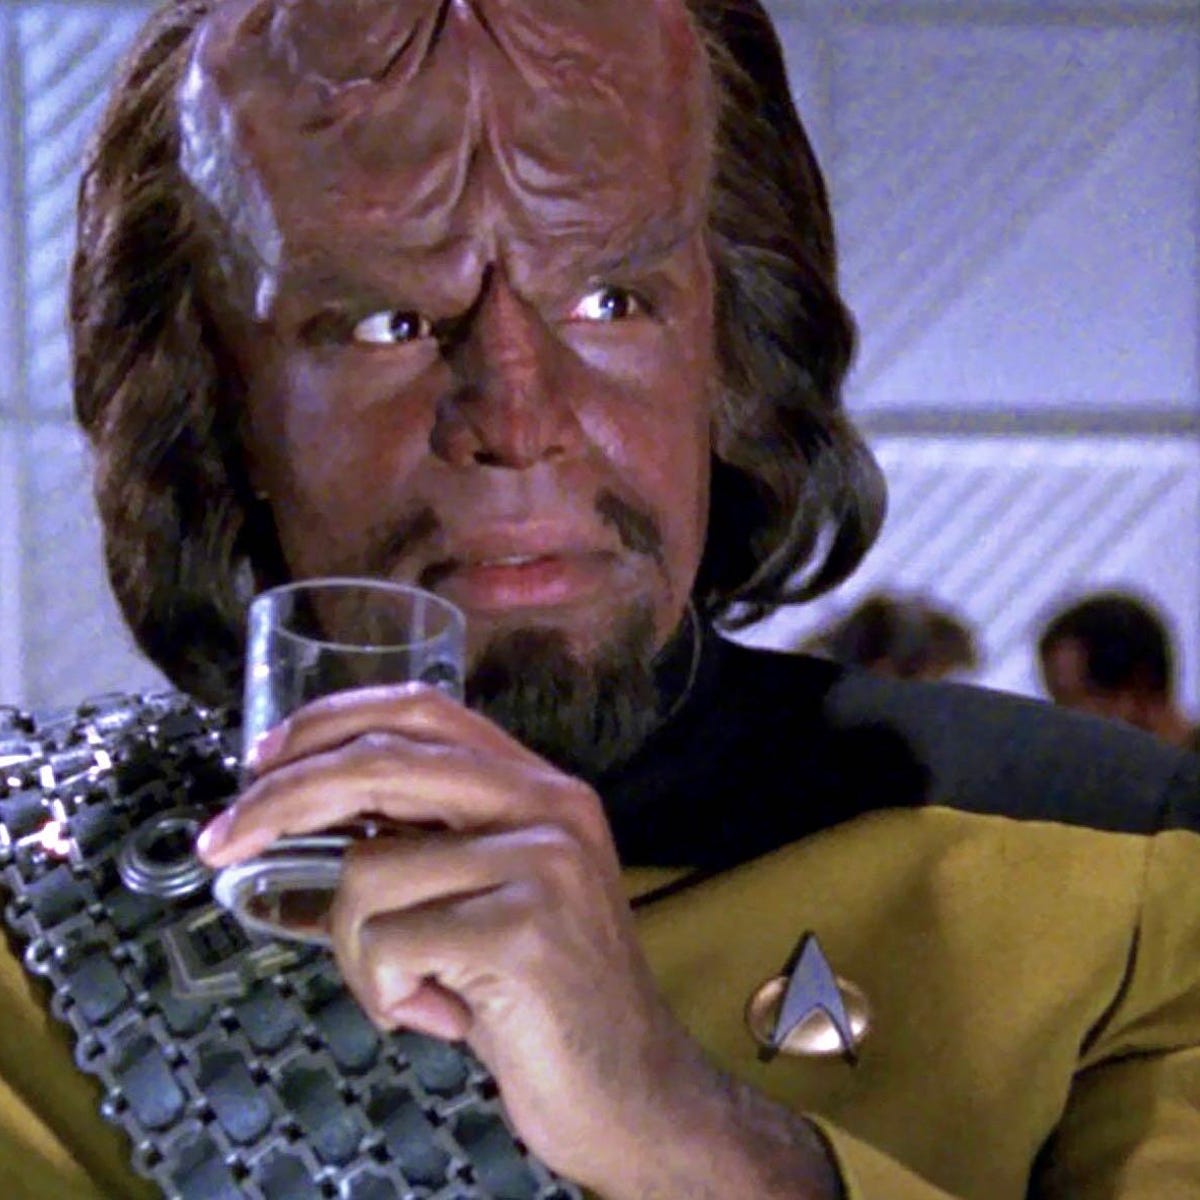 Star Trek could have got an 'incredibly funny' Worf show - CNET